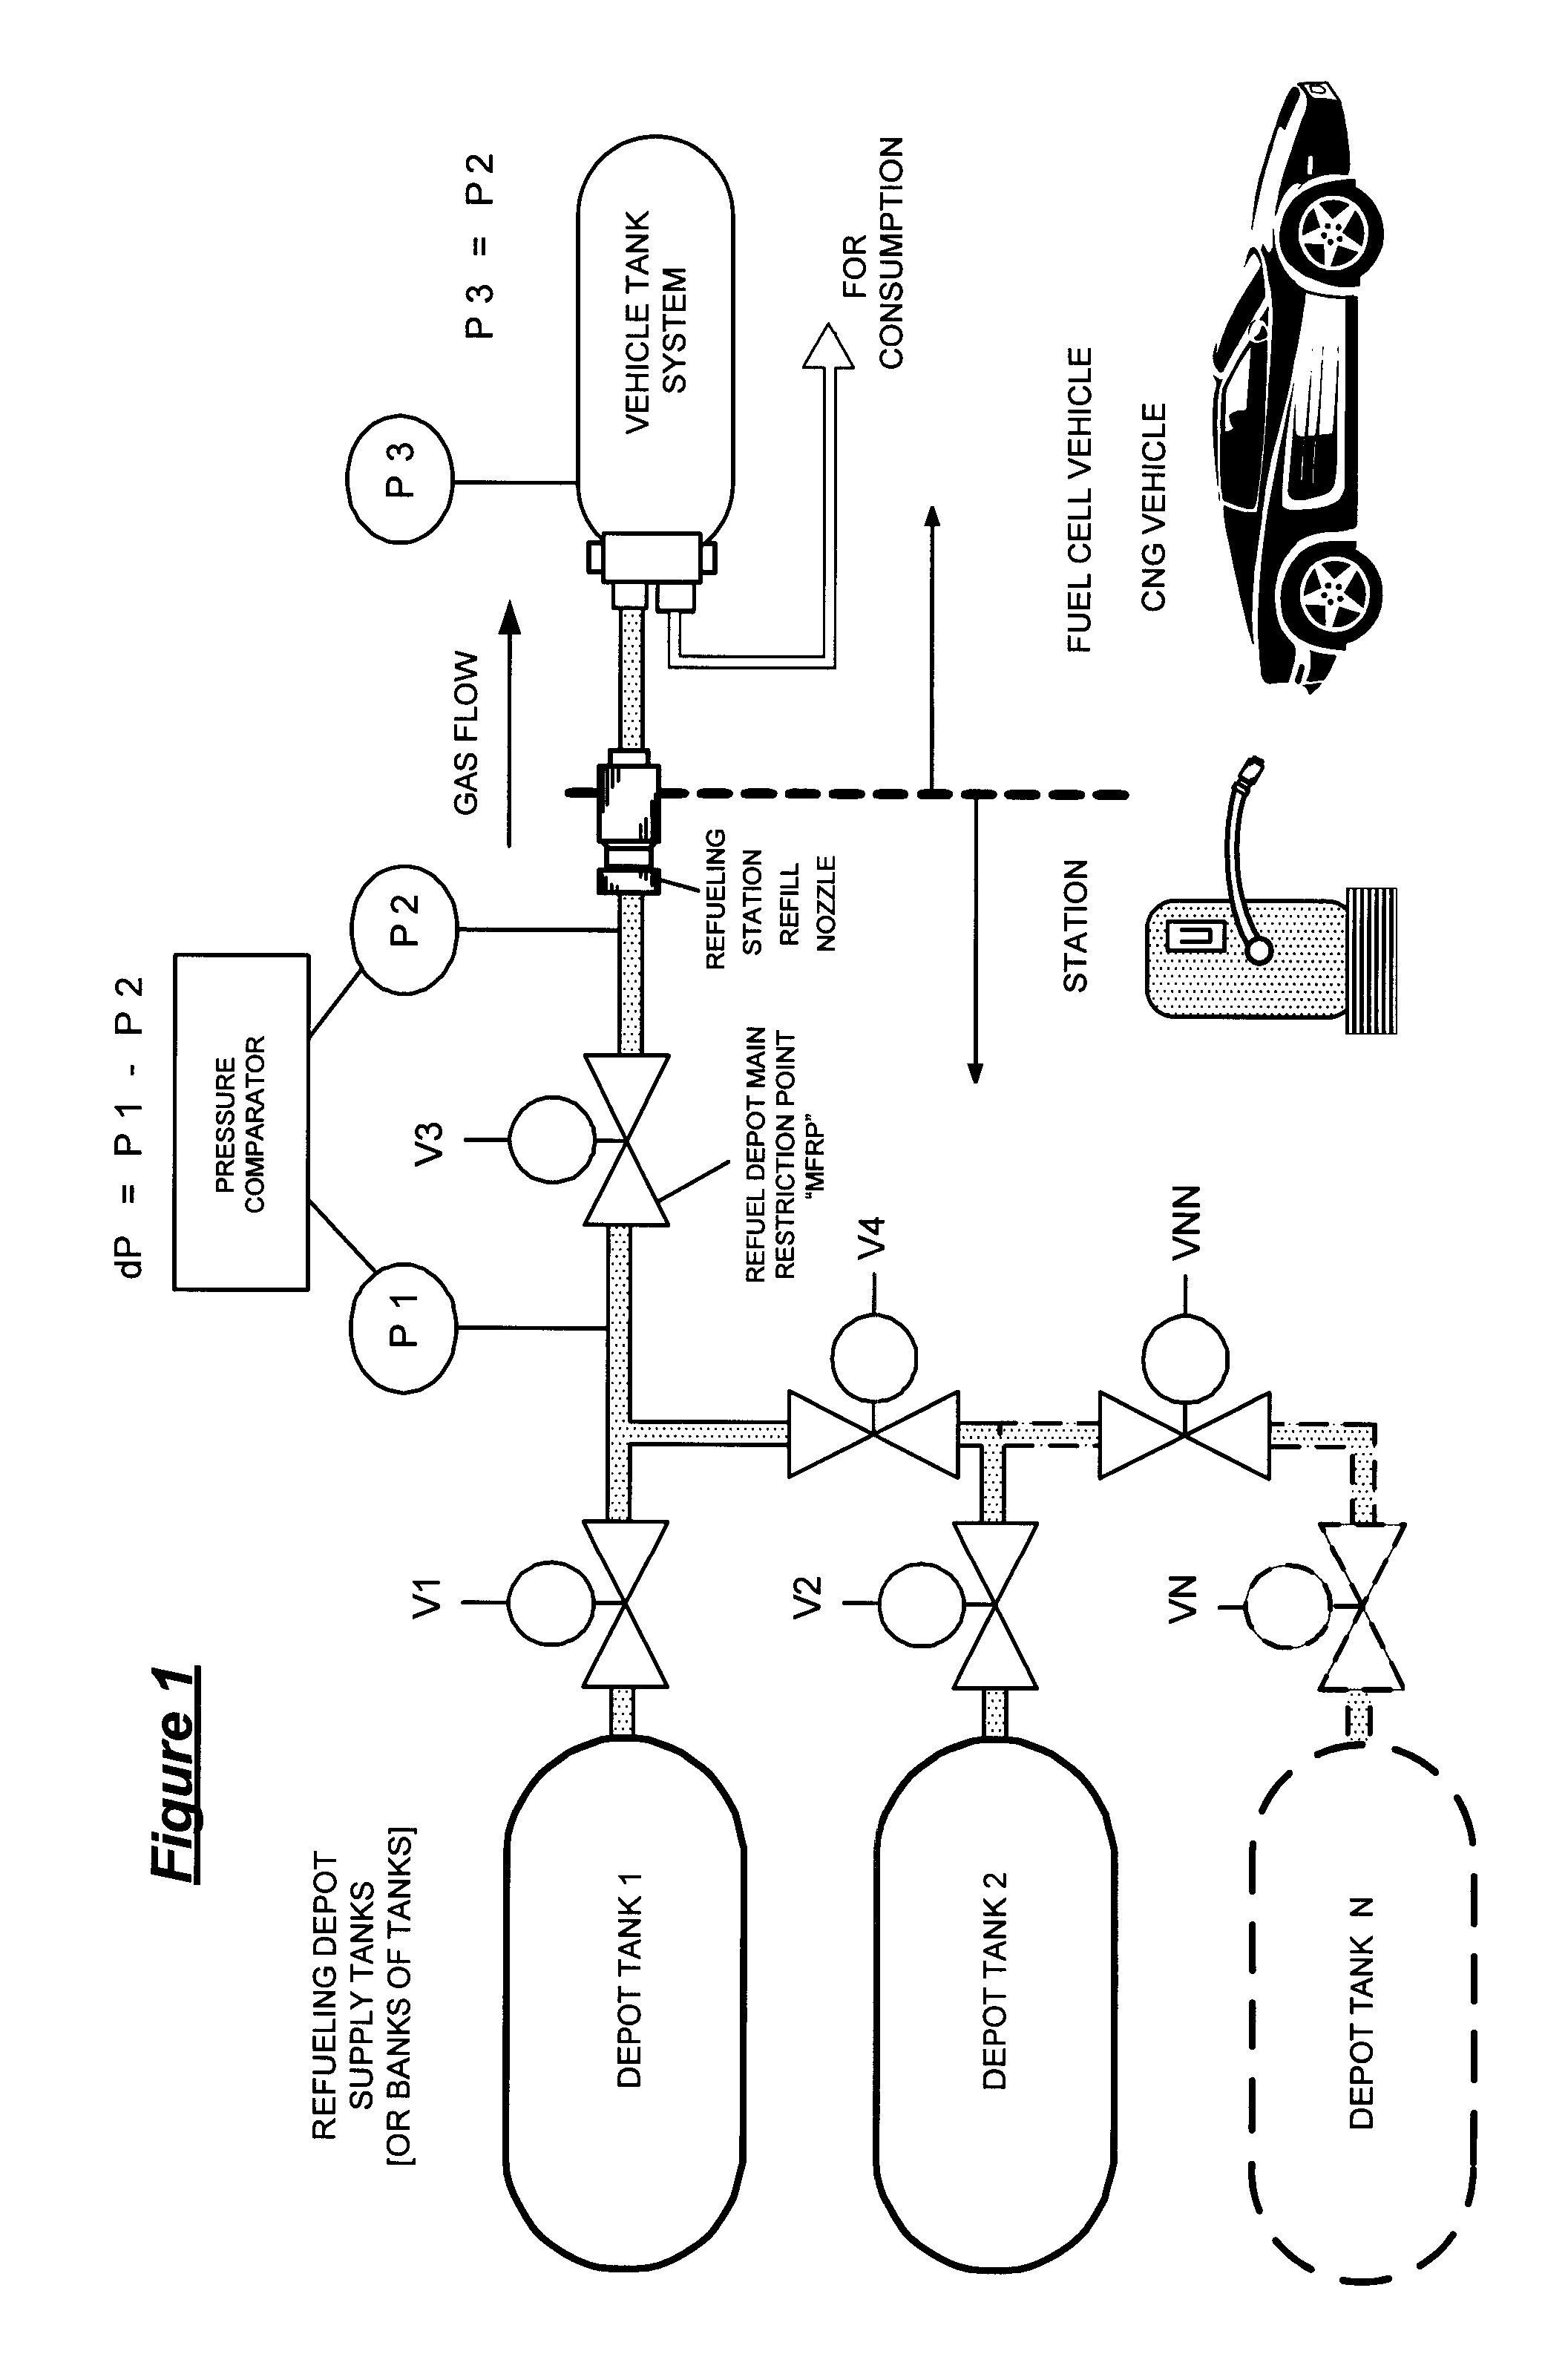 Pressure differential system for controlling high pressure refill gas flow into on board vehicle fuel tanks